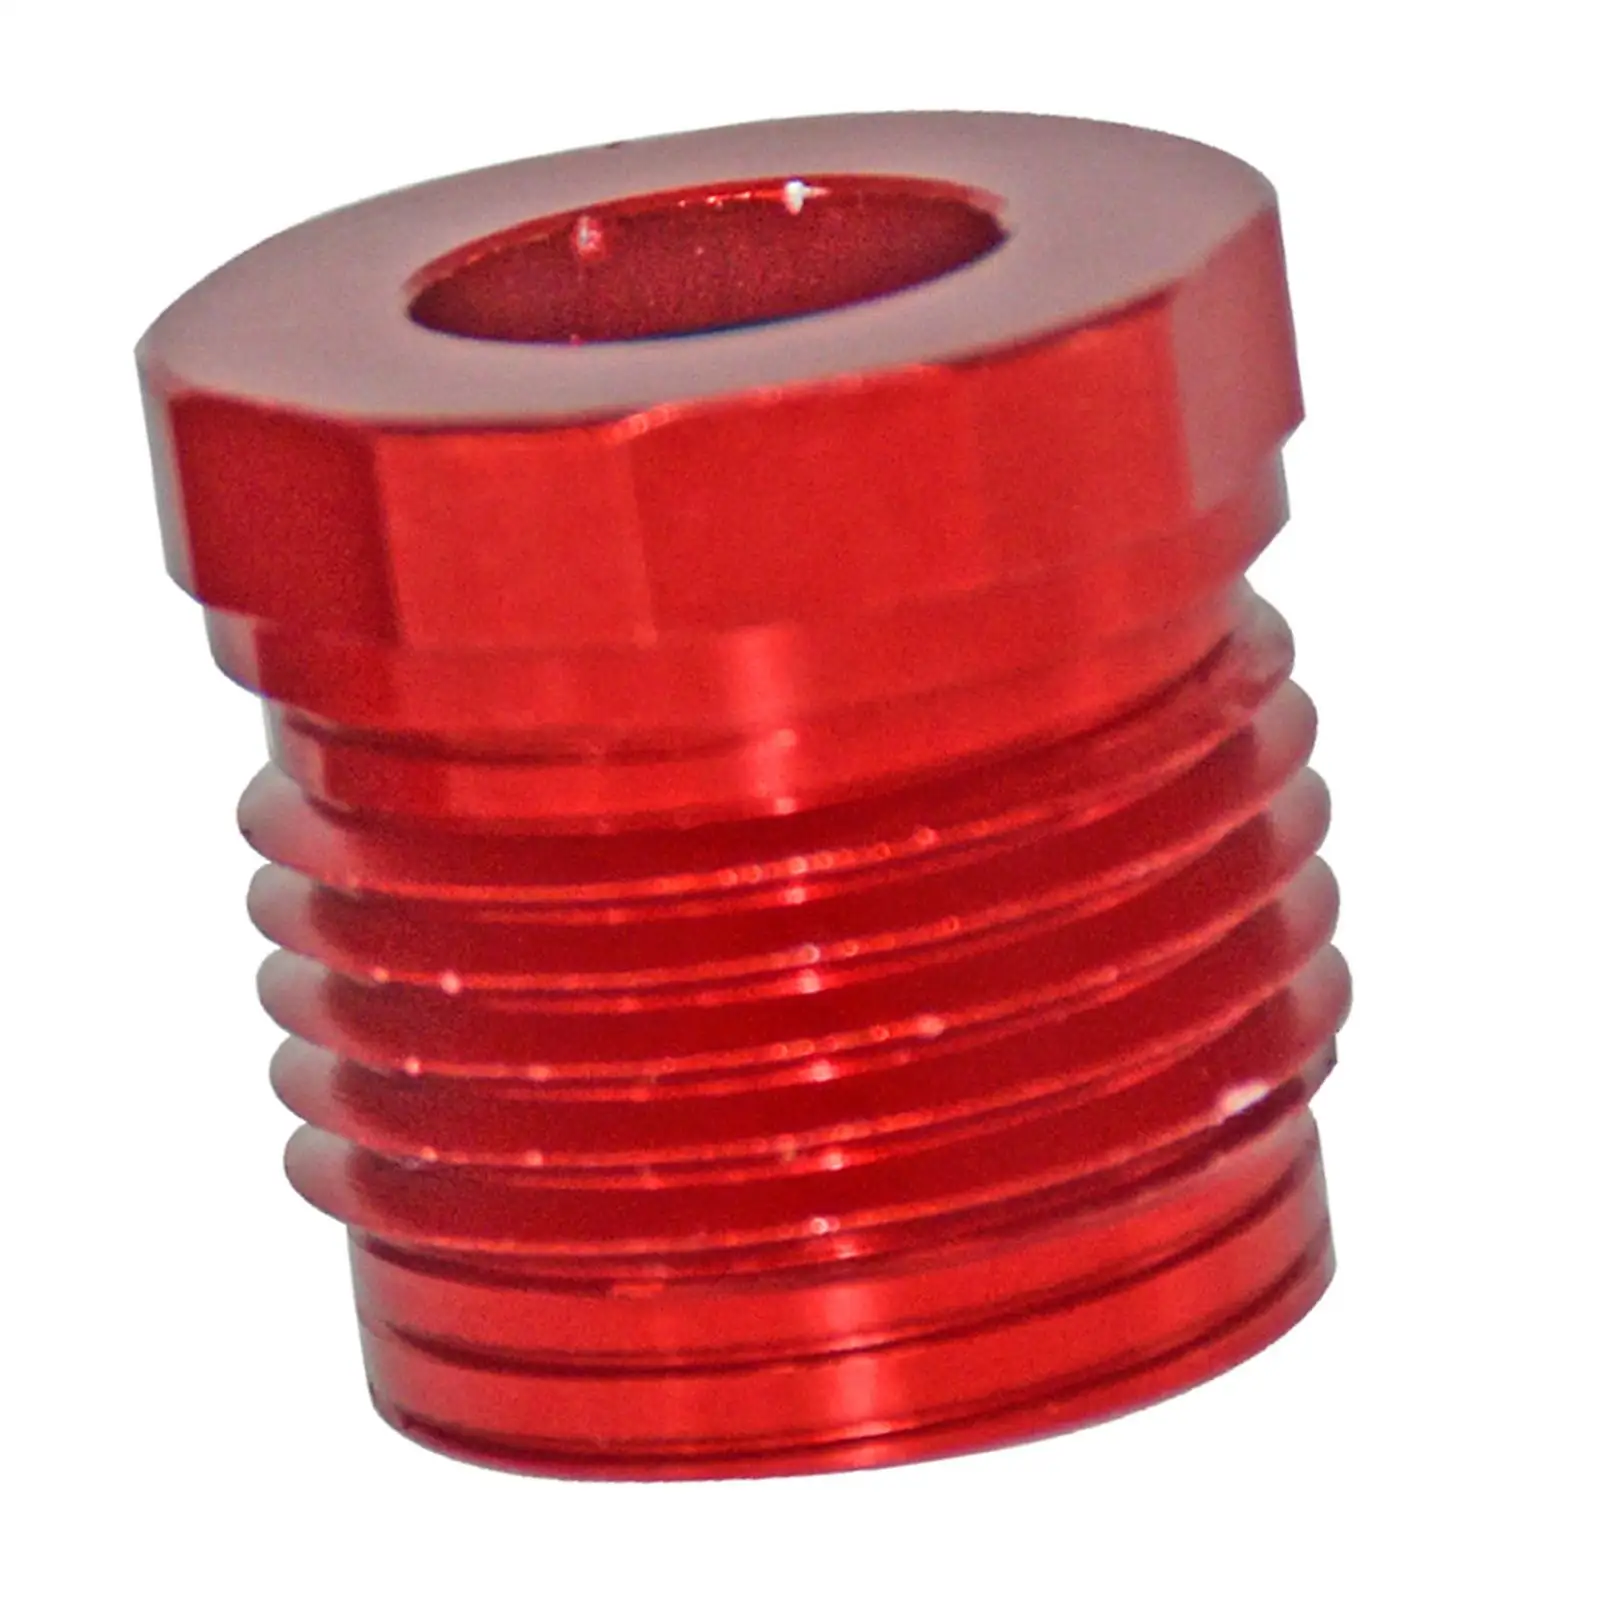 Steering and Reverse Cable Lock Nut Replaces Wear Resistant Aluminum Red Cable